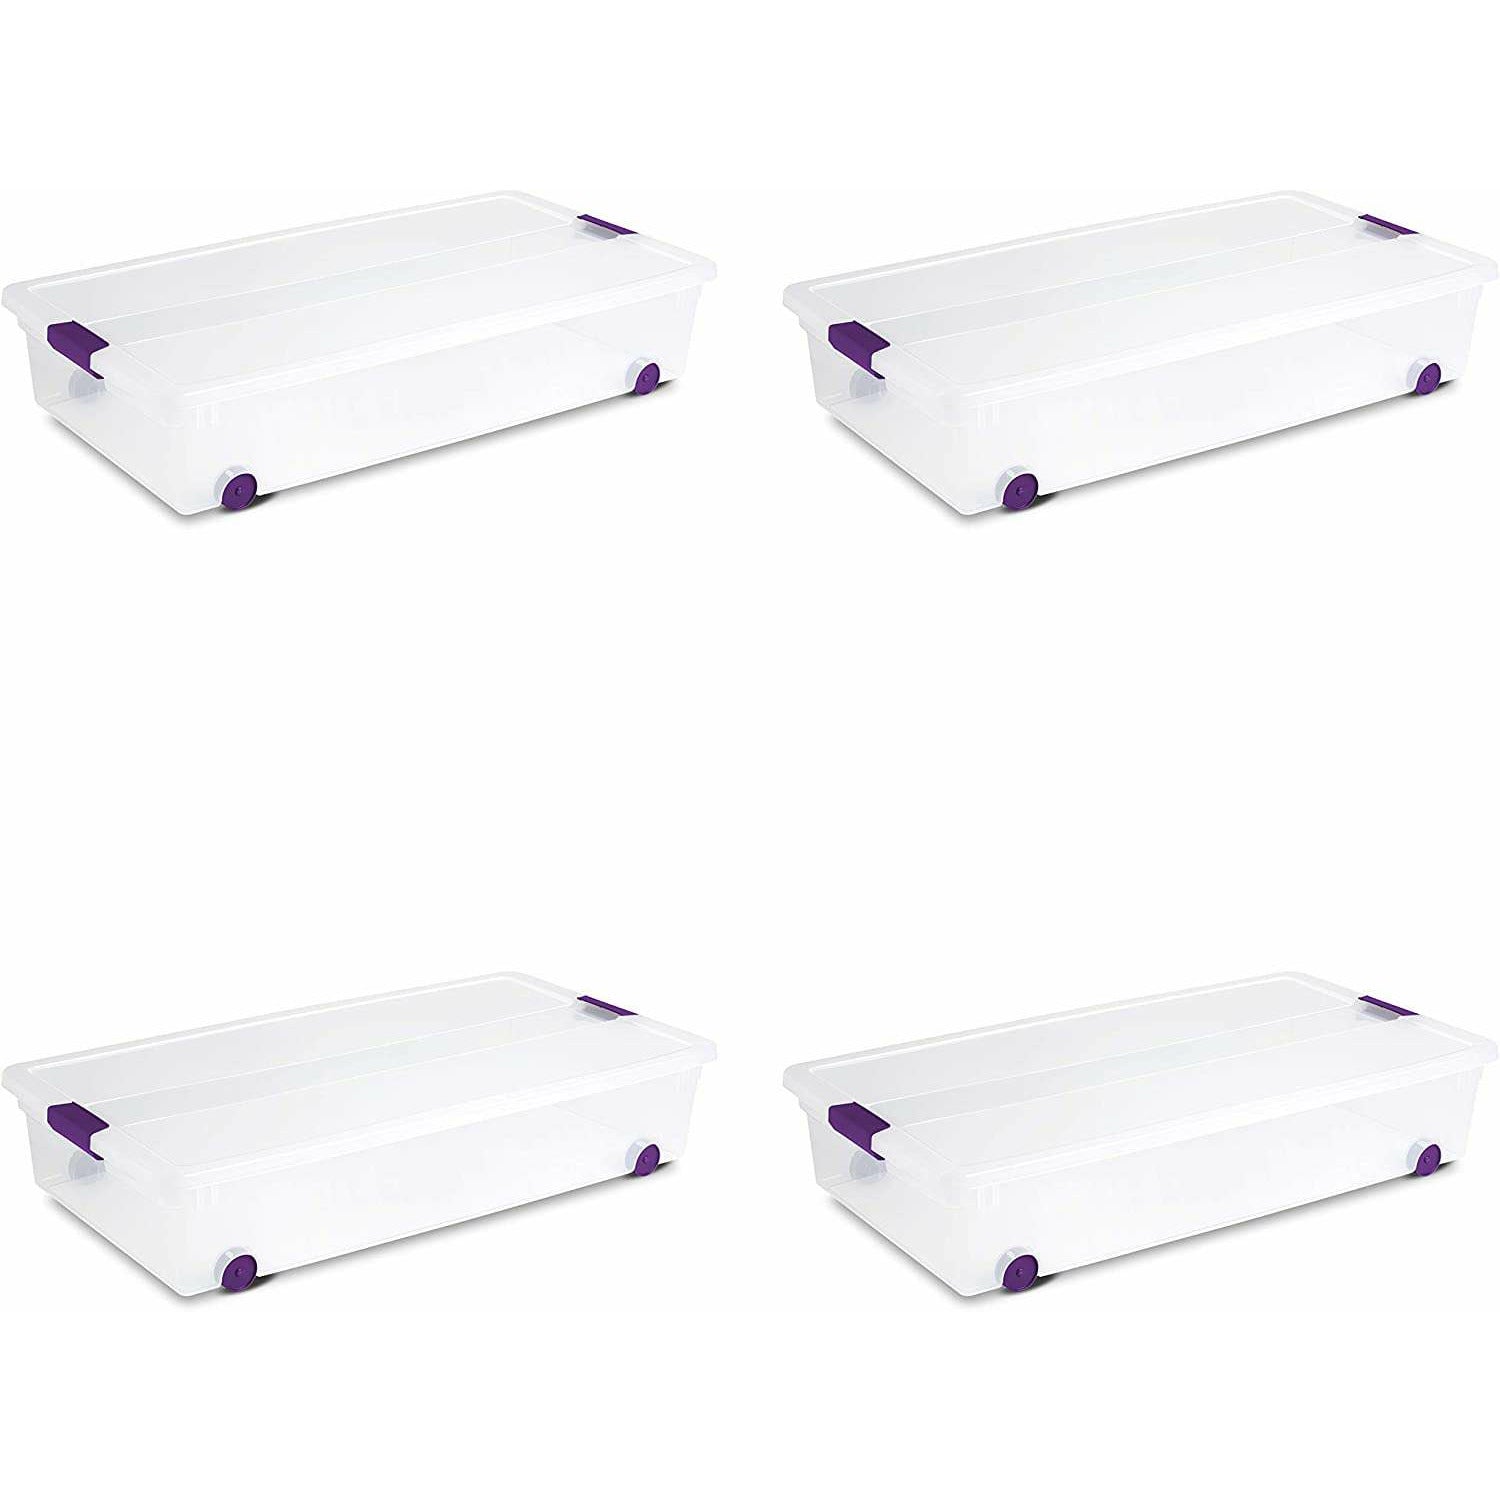 Sterilite 60 qt Clearview Latch Lid Wheeled Underbed Box (4 Pack)